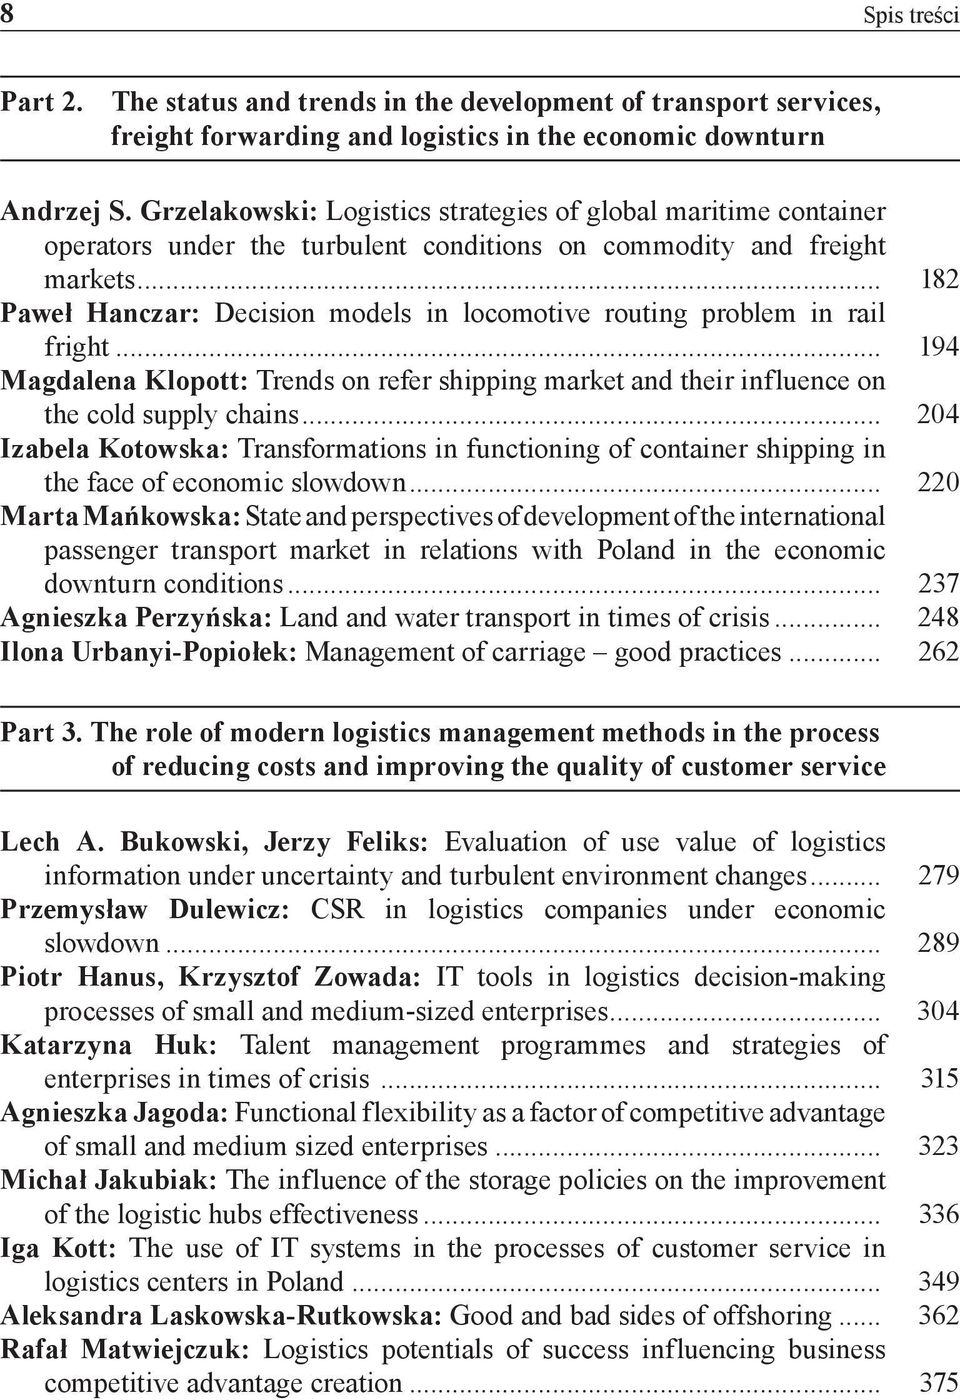 .. 182 Paweł Hanczar: Decision models in locomotive routing problem in rail fright... 194 Magdalena Klopott: Trends on refer shipping market and their influence on the cold supply chains.